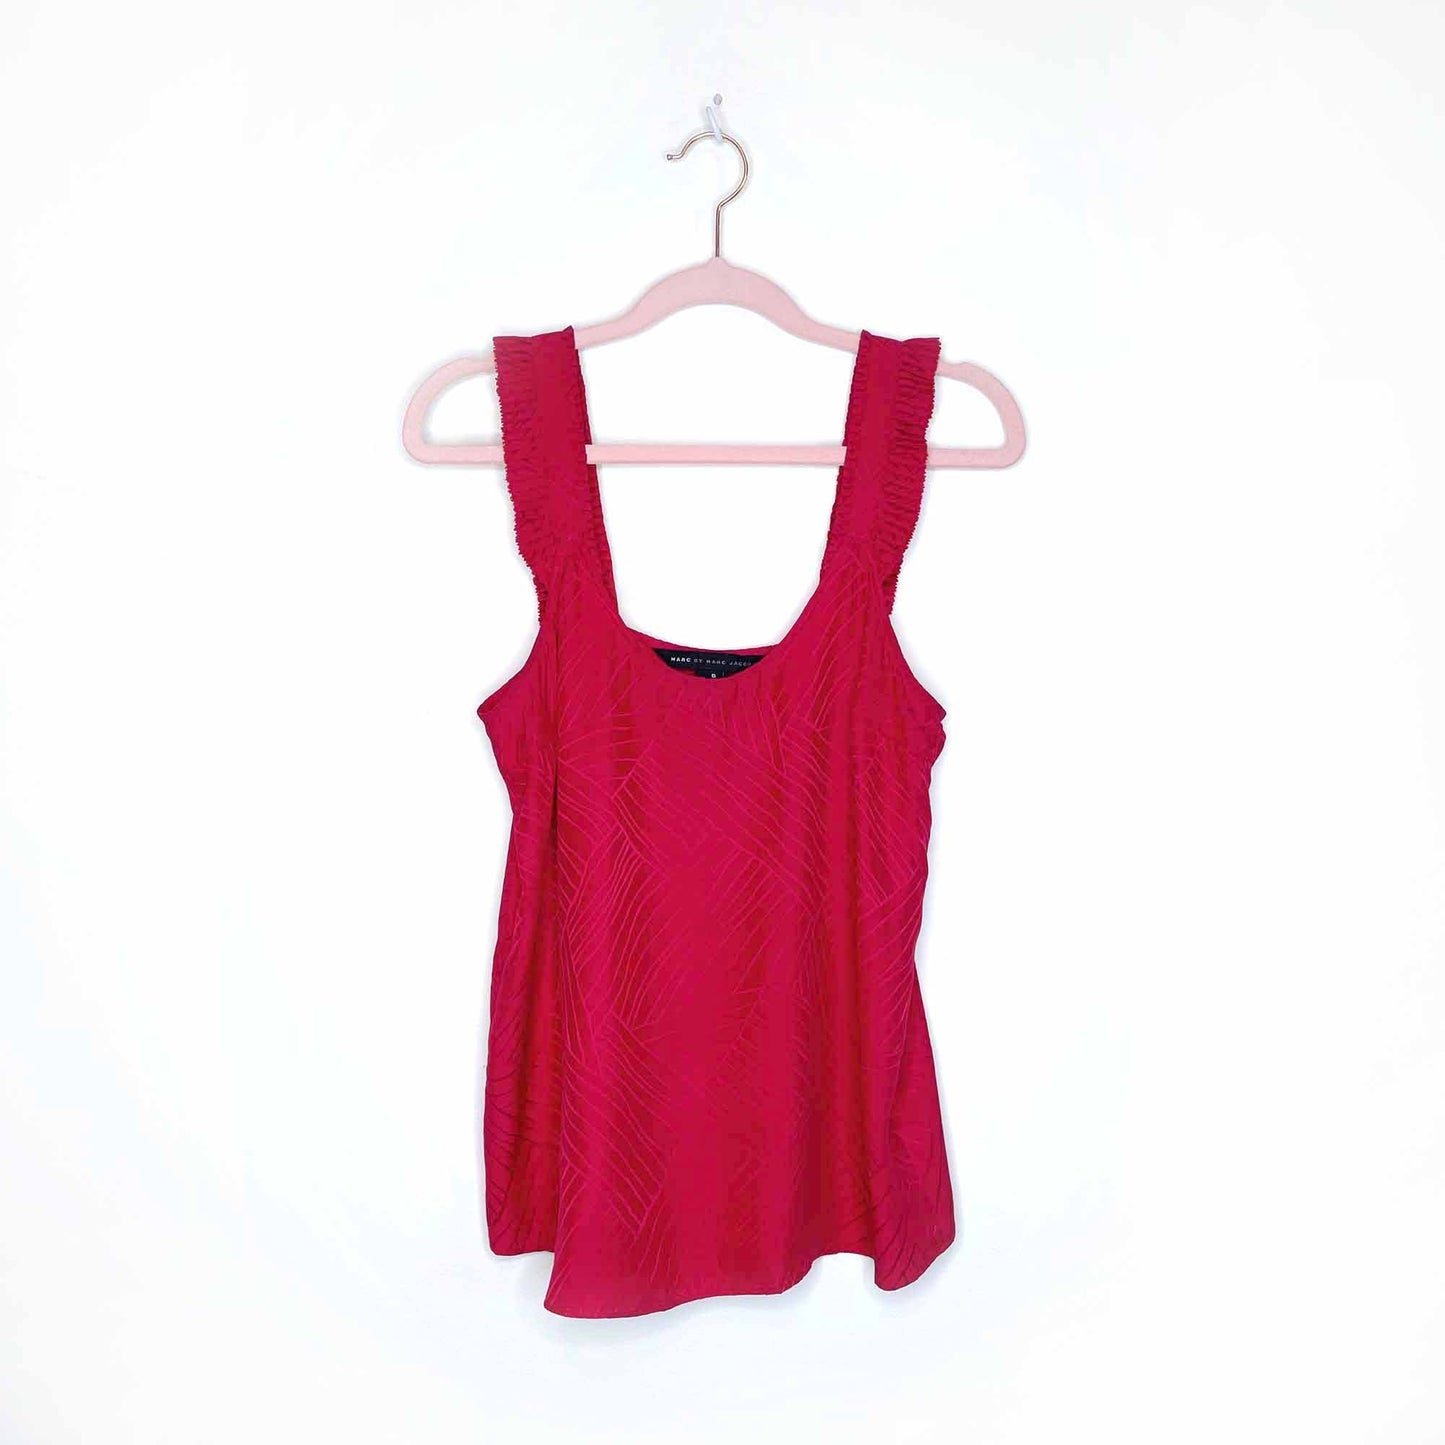 marc by marc jacobs red silk tank - size 0